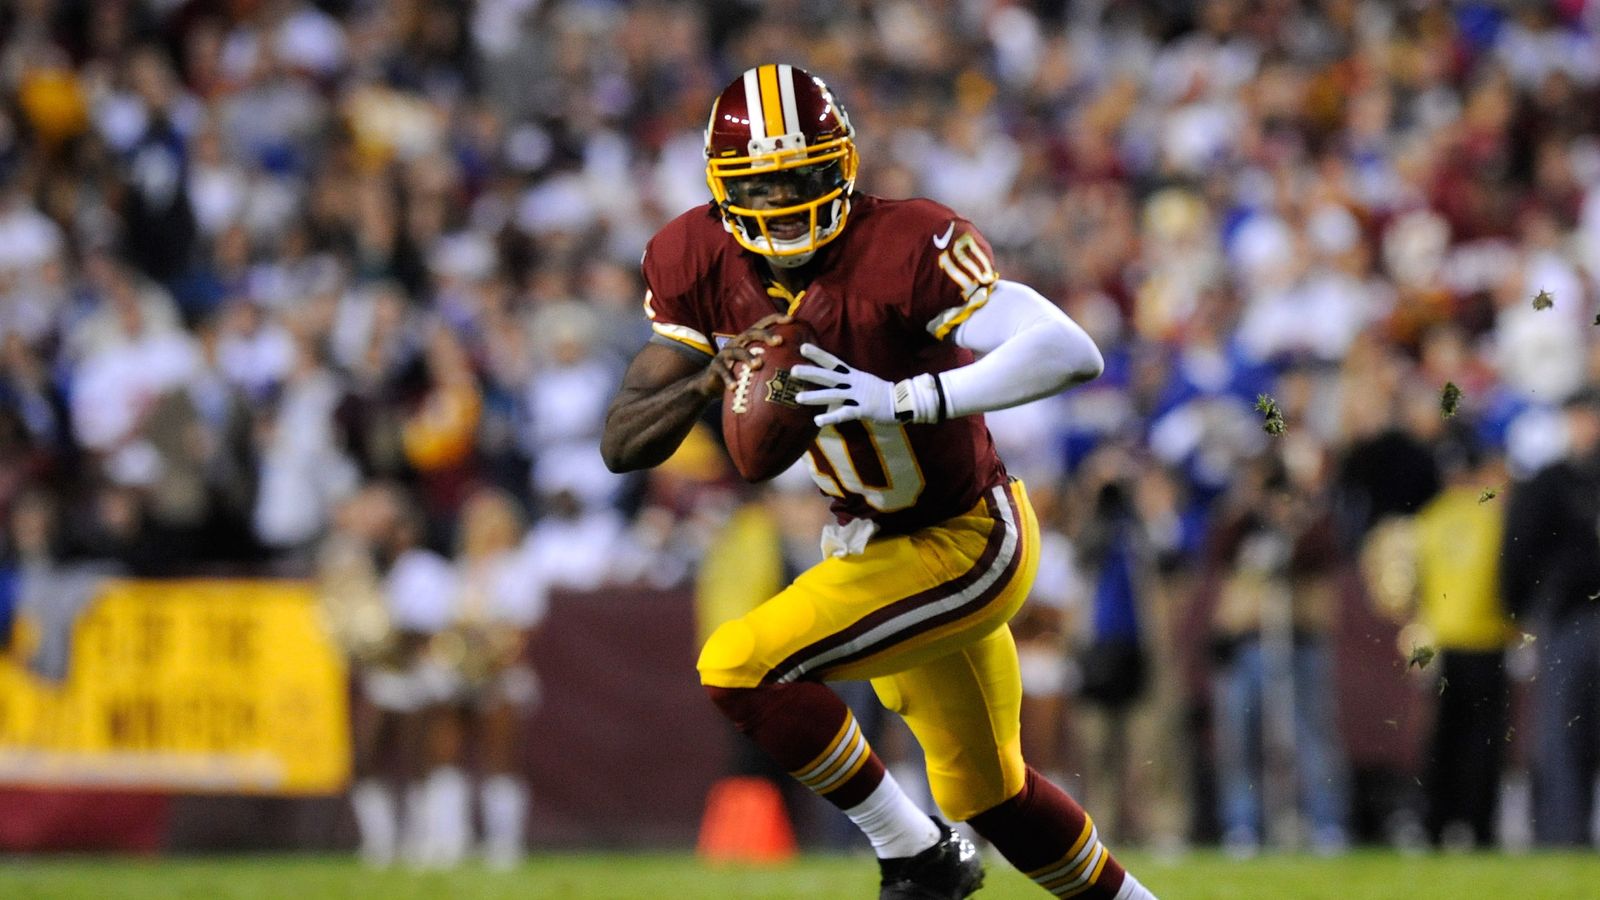 With Paul out for the year, Redskins ponder how to fill the void